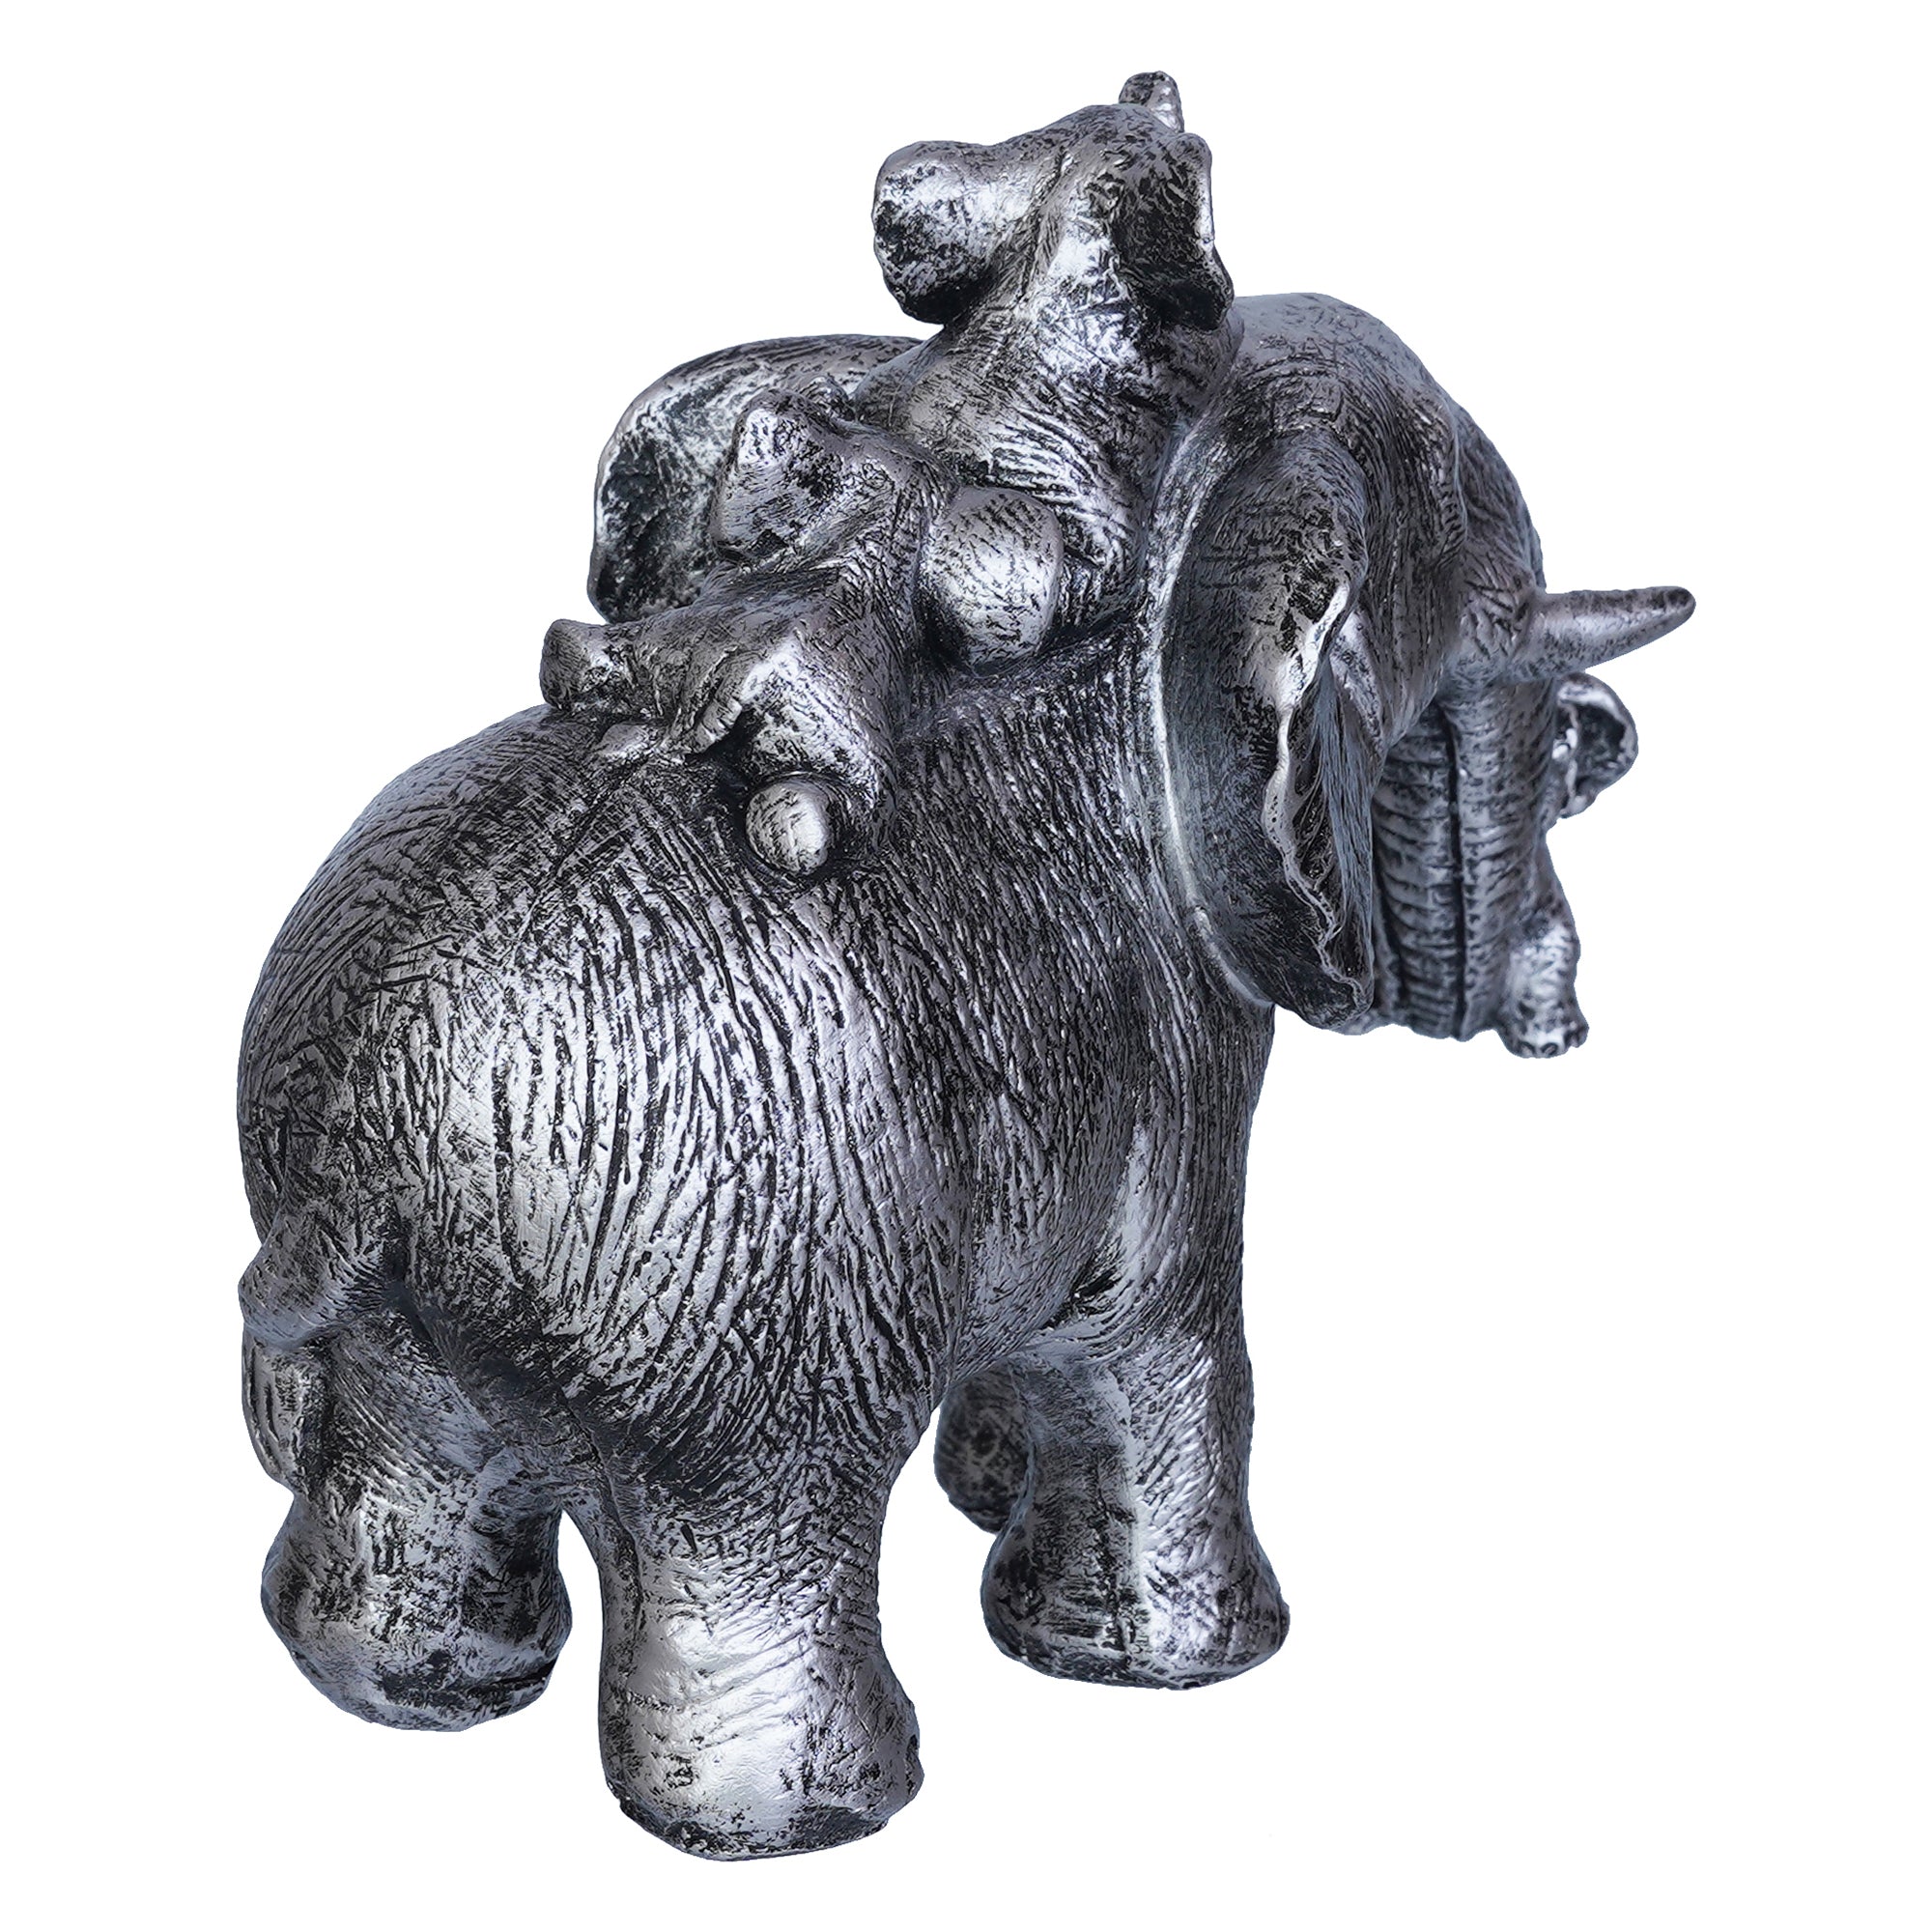 Cute Silver Elephant Statue Carries Three Calves on Its Back and Trunk 8